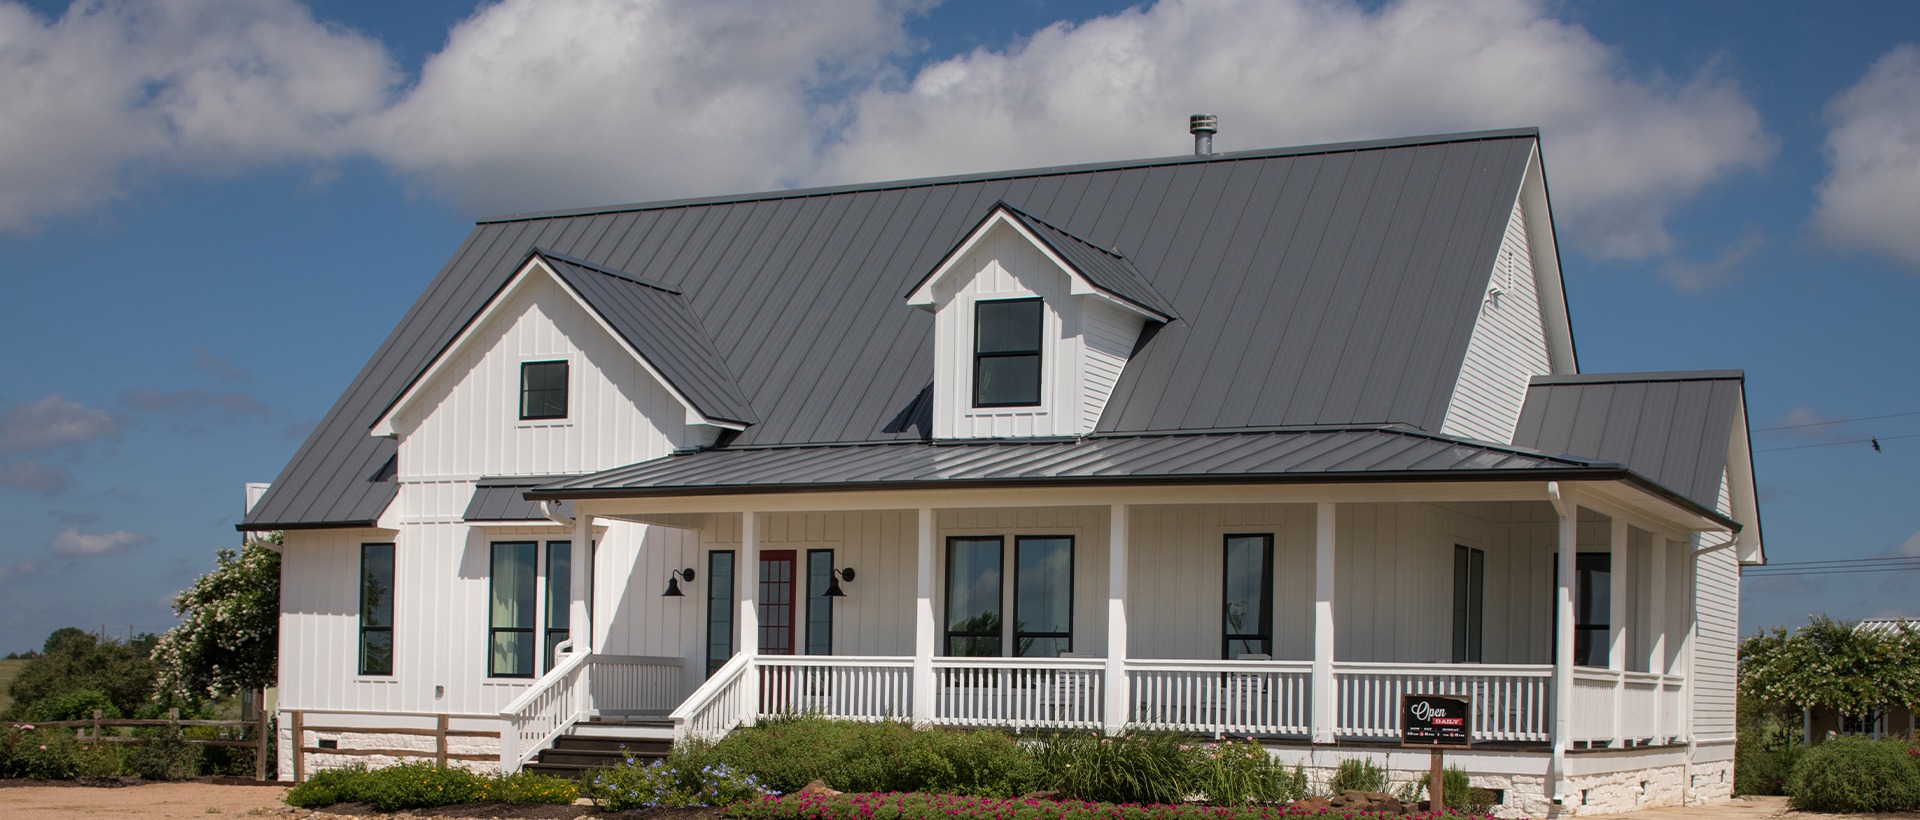 Texas Casual Cottages - Schulte Roofing